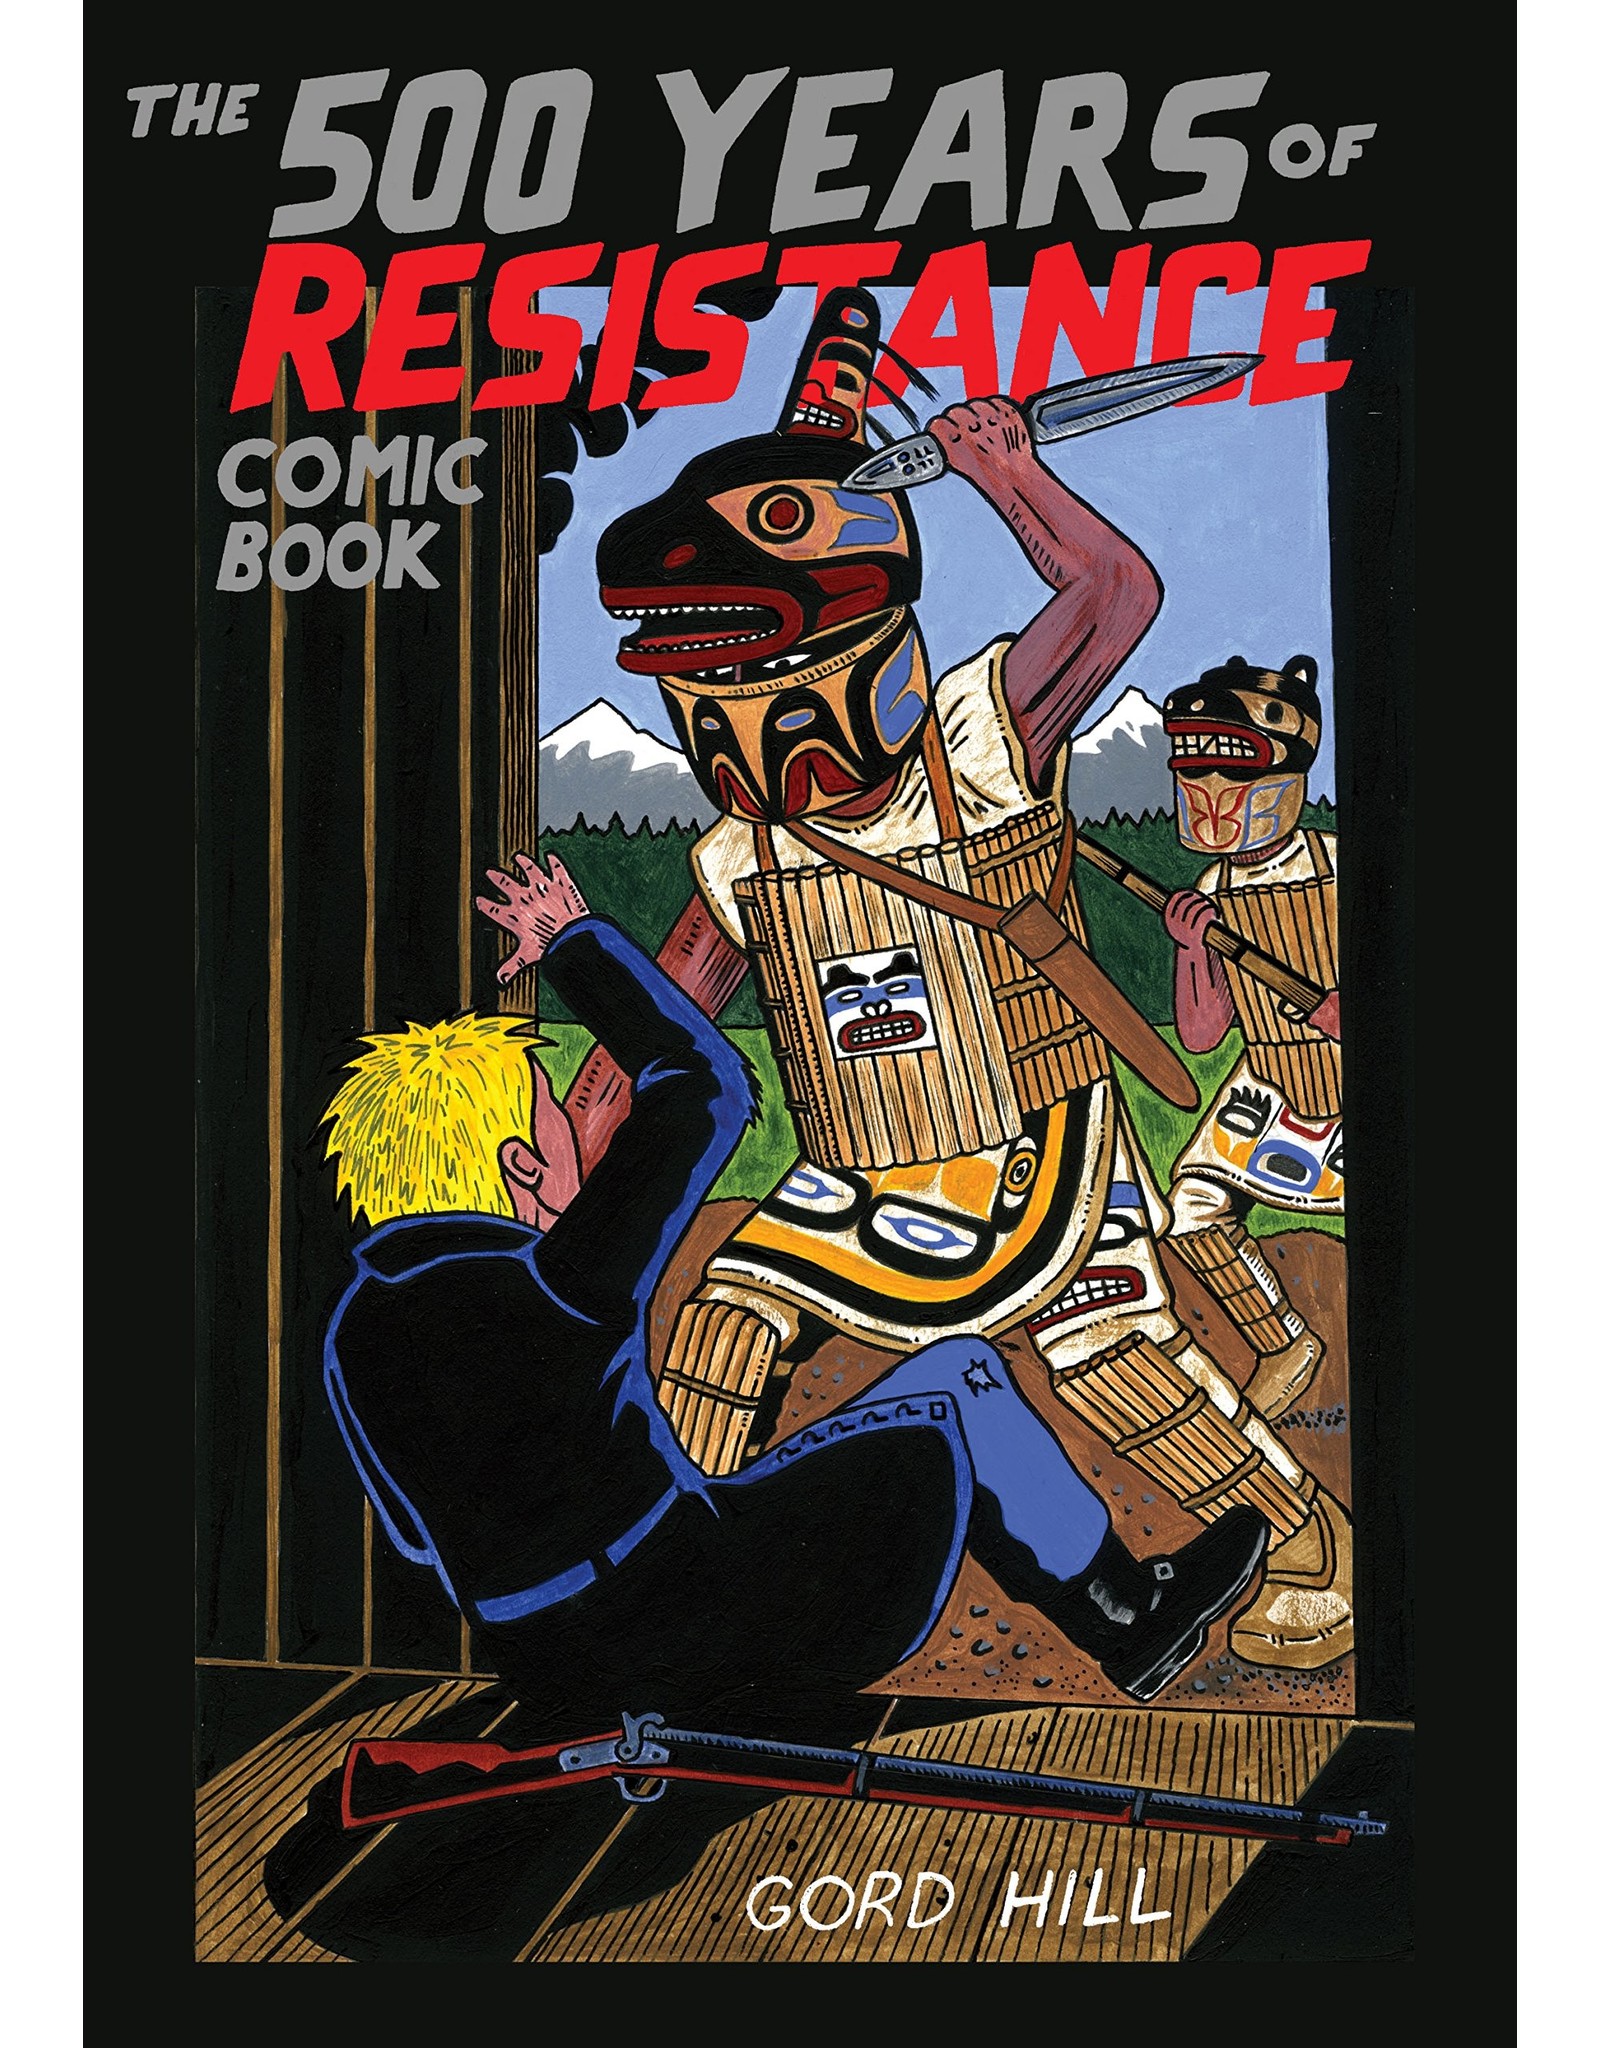 Literature 500 Years of Indigenous Resistance